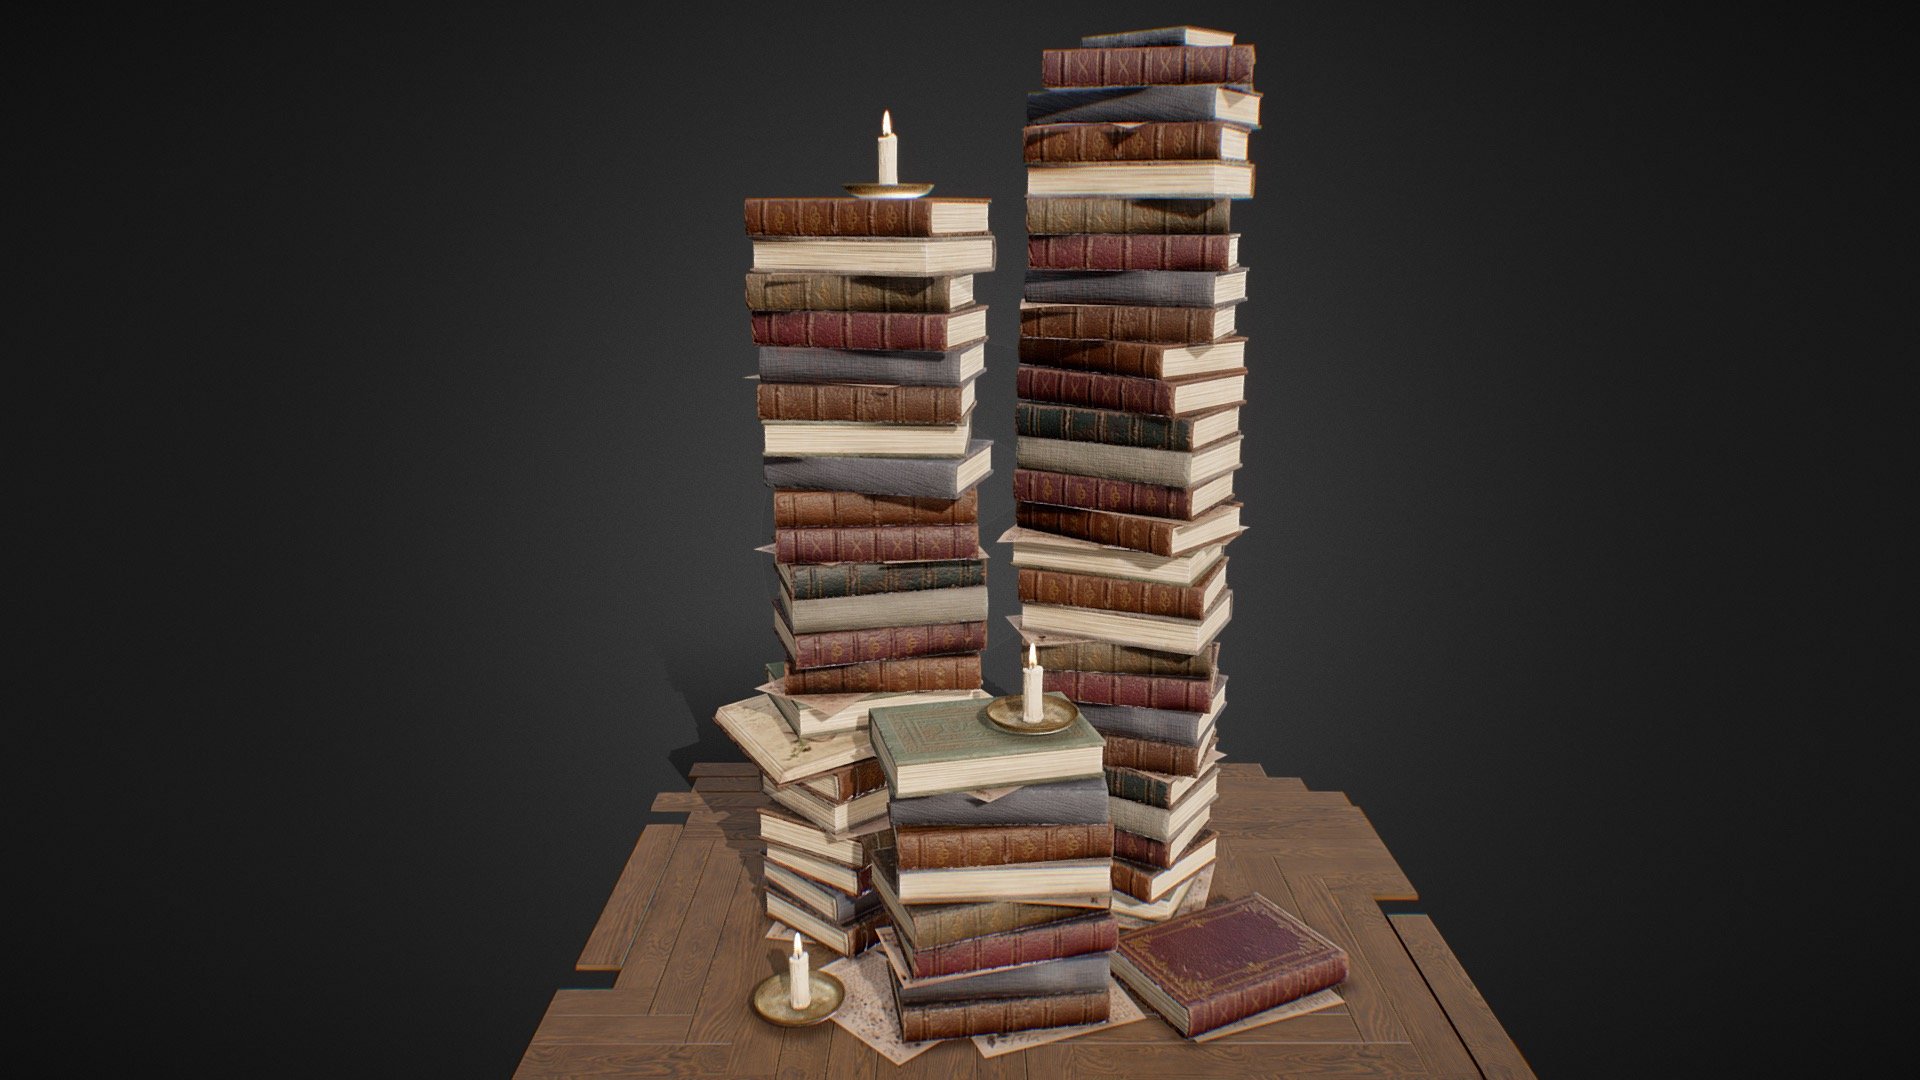 This model is a collection of game-ready stacked books, with scattered paper, and warm candles.

Features




The model includes 3 book stackes (with leather and cloth books), scattered paper, and small candles. The candles are animated.

The model is low-poly and optimised for use in game, VR, archviz, and visual production.

The model has clean topology, grouped and named appropriately, and unwrapped.

19,830 triangles; 10,679 vertices.

Modelled in Blender and textured in Substance Painter.

Textures

Model has 1 PBR texture set. Textures are in .png at 4096x4096 and includes: Base Colour, Roughness, Metallic, Normal, Alpha, Emissive - Old Library Books Stacked - Buy Royalty Free 3D model by Matthew Collings (@mtcollings) 3d model